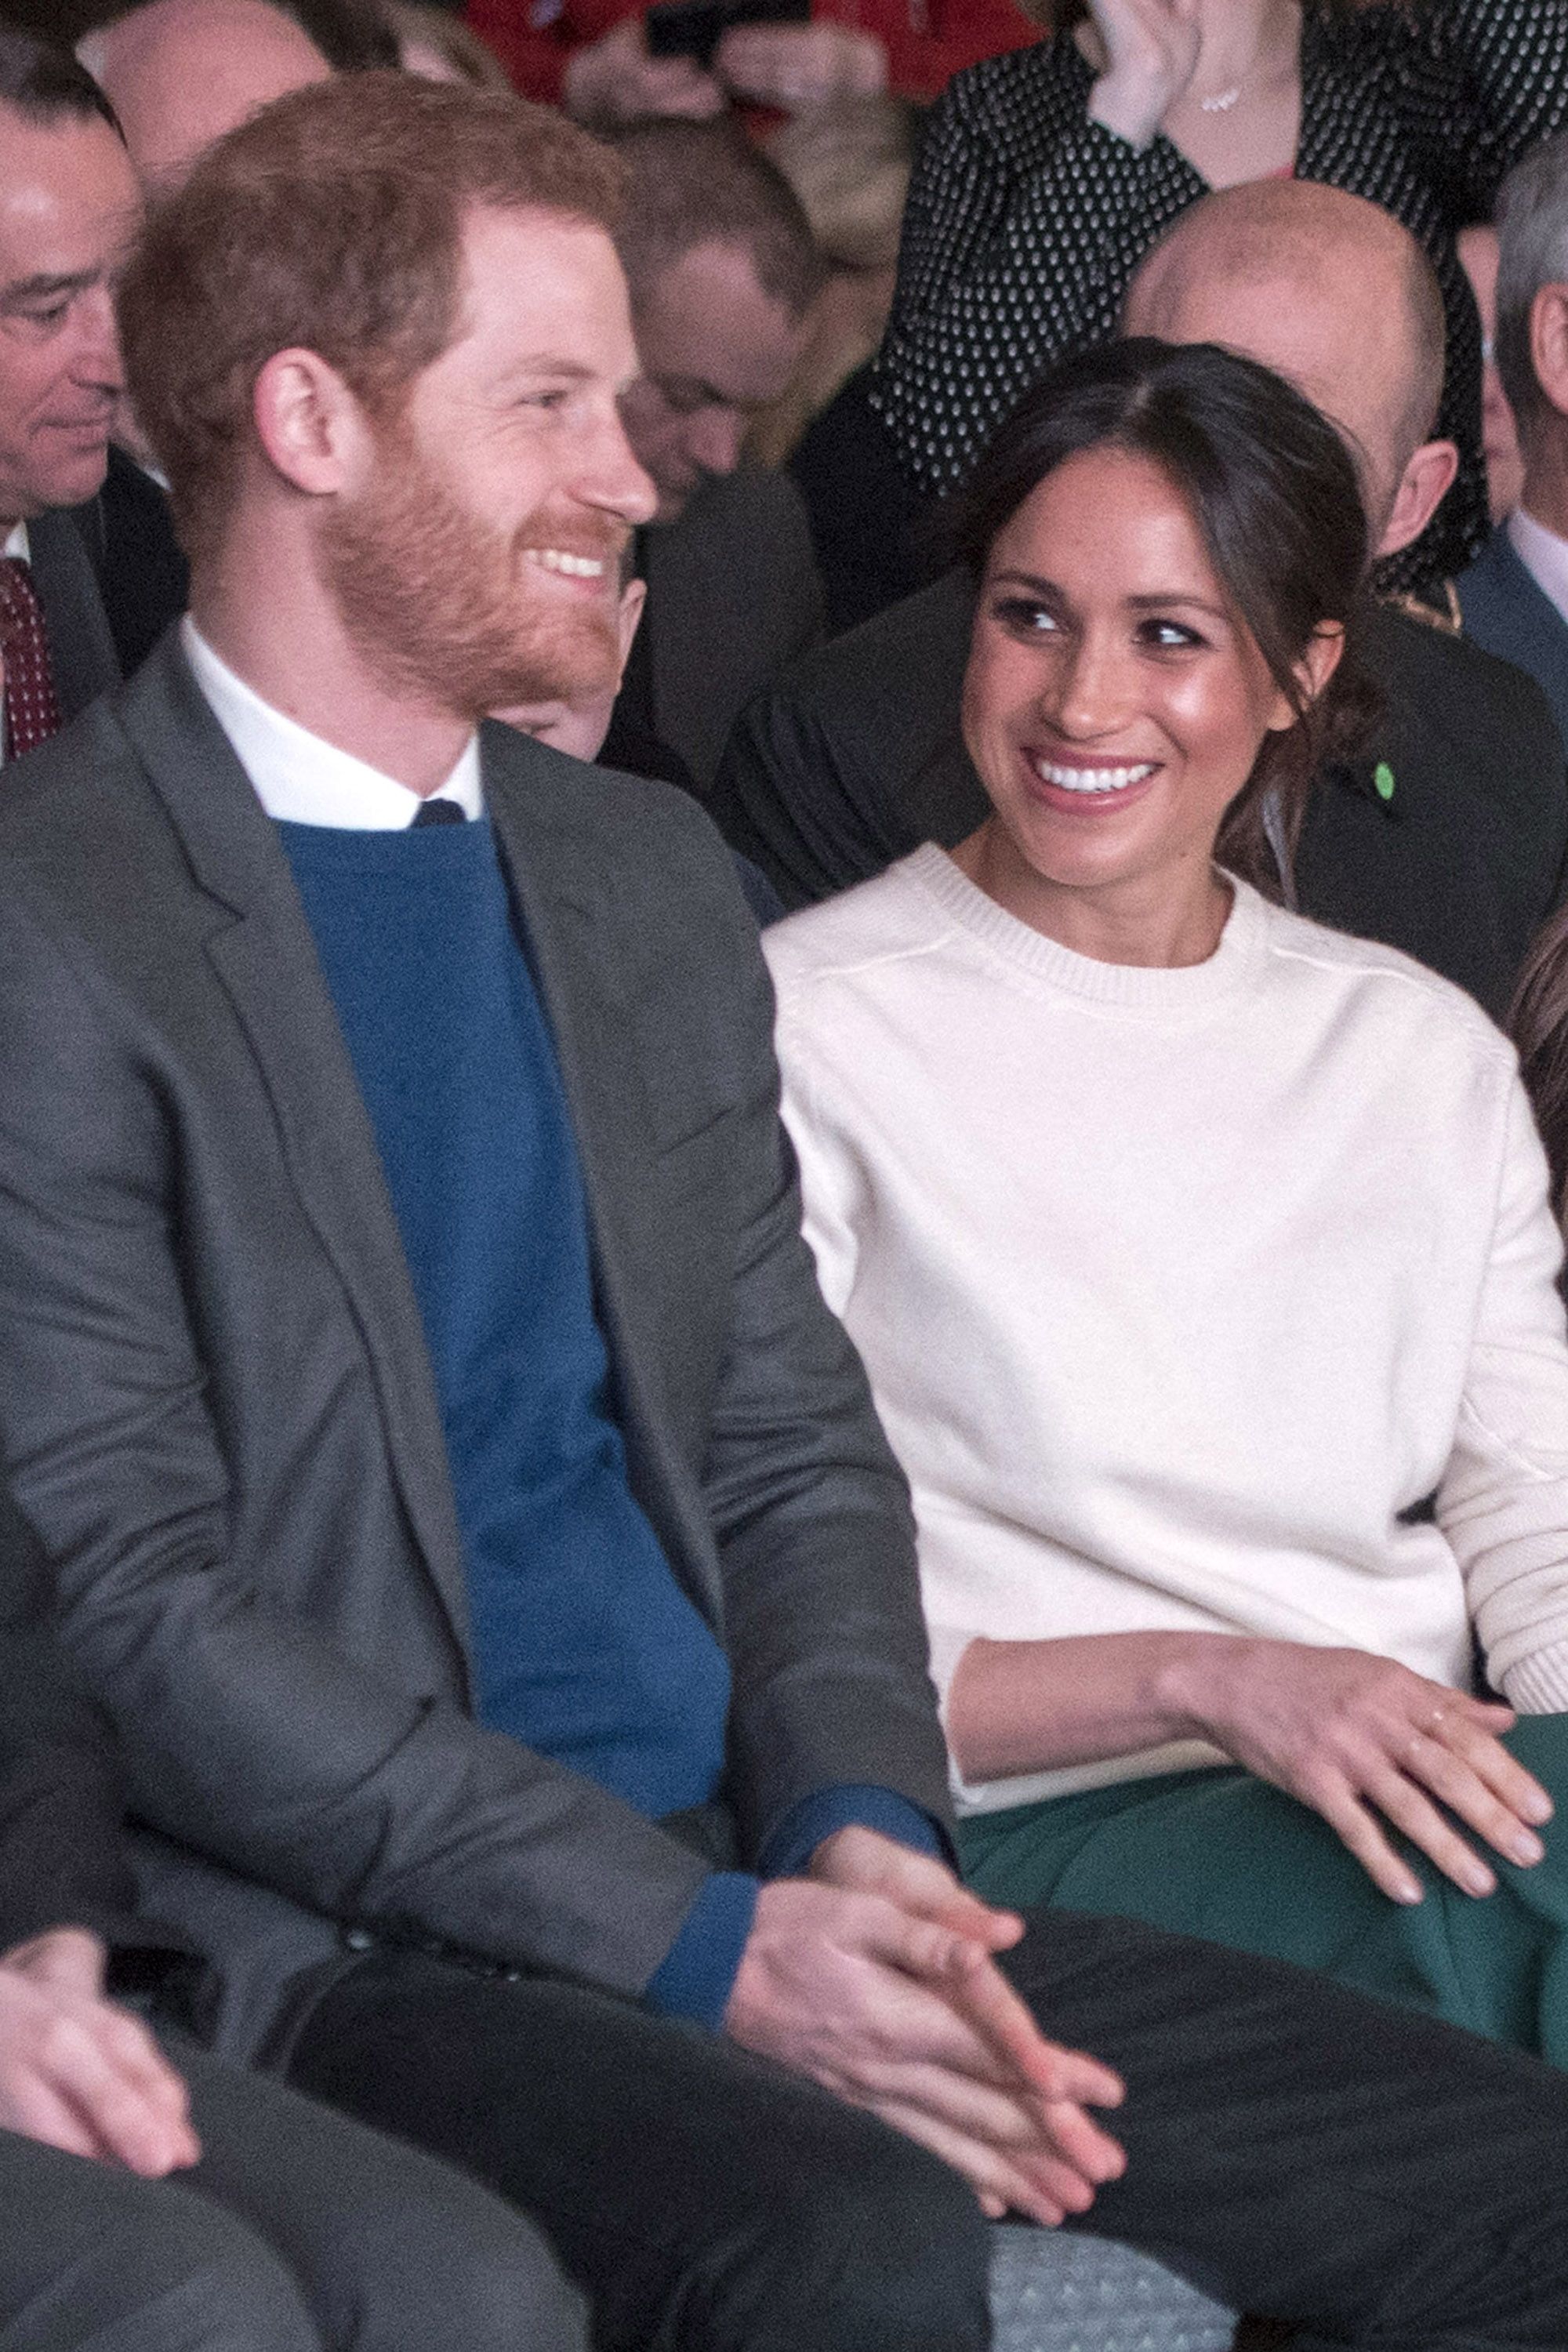 https://hips.hearstapps.com/hmg-prod.s3.amazonaws.com/images/hbz-prince-harry-meghan-markle-cute-moments-gettyimages-936896294-1523378909.jpg?crop=1xw:1xh;center,top